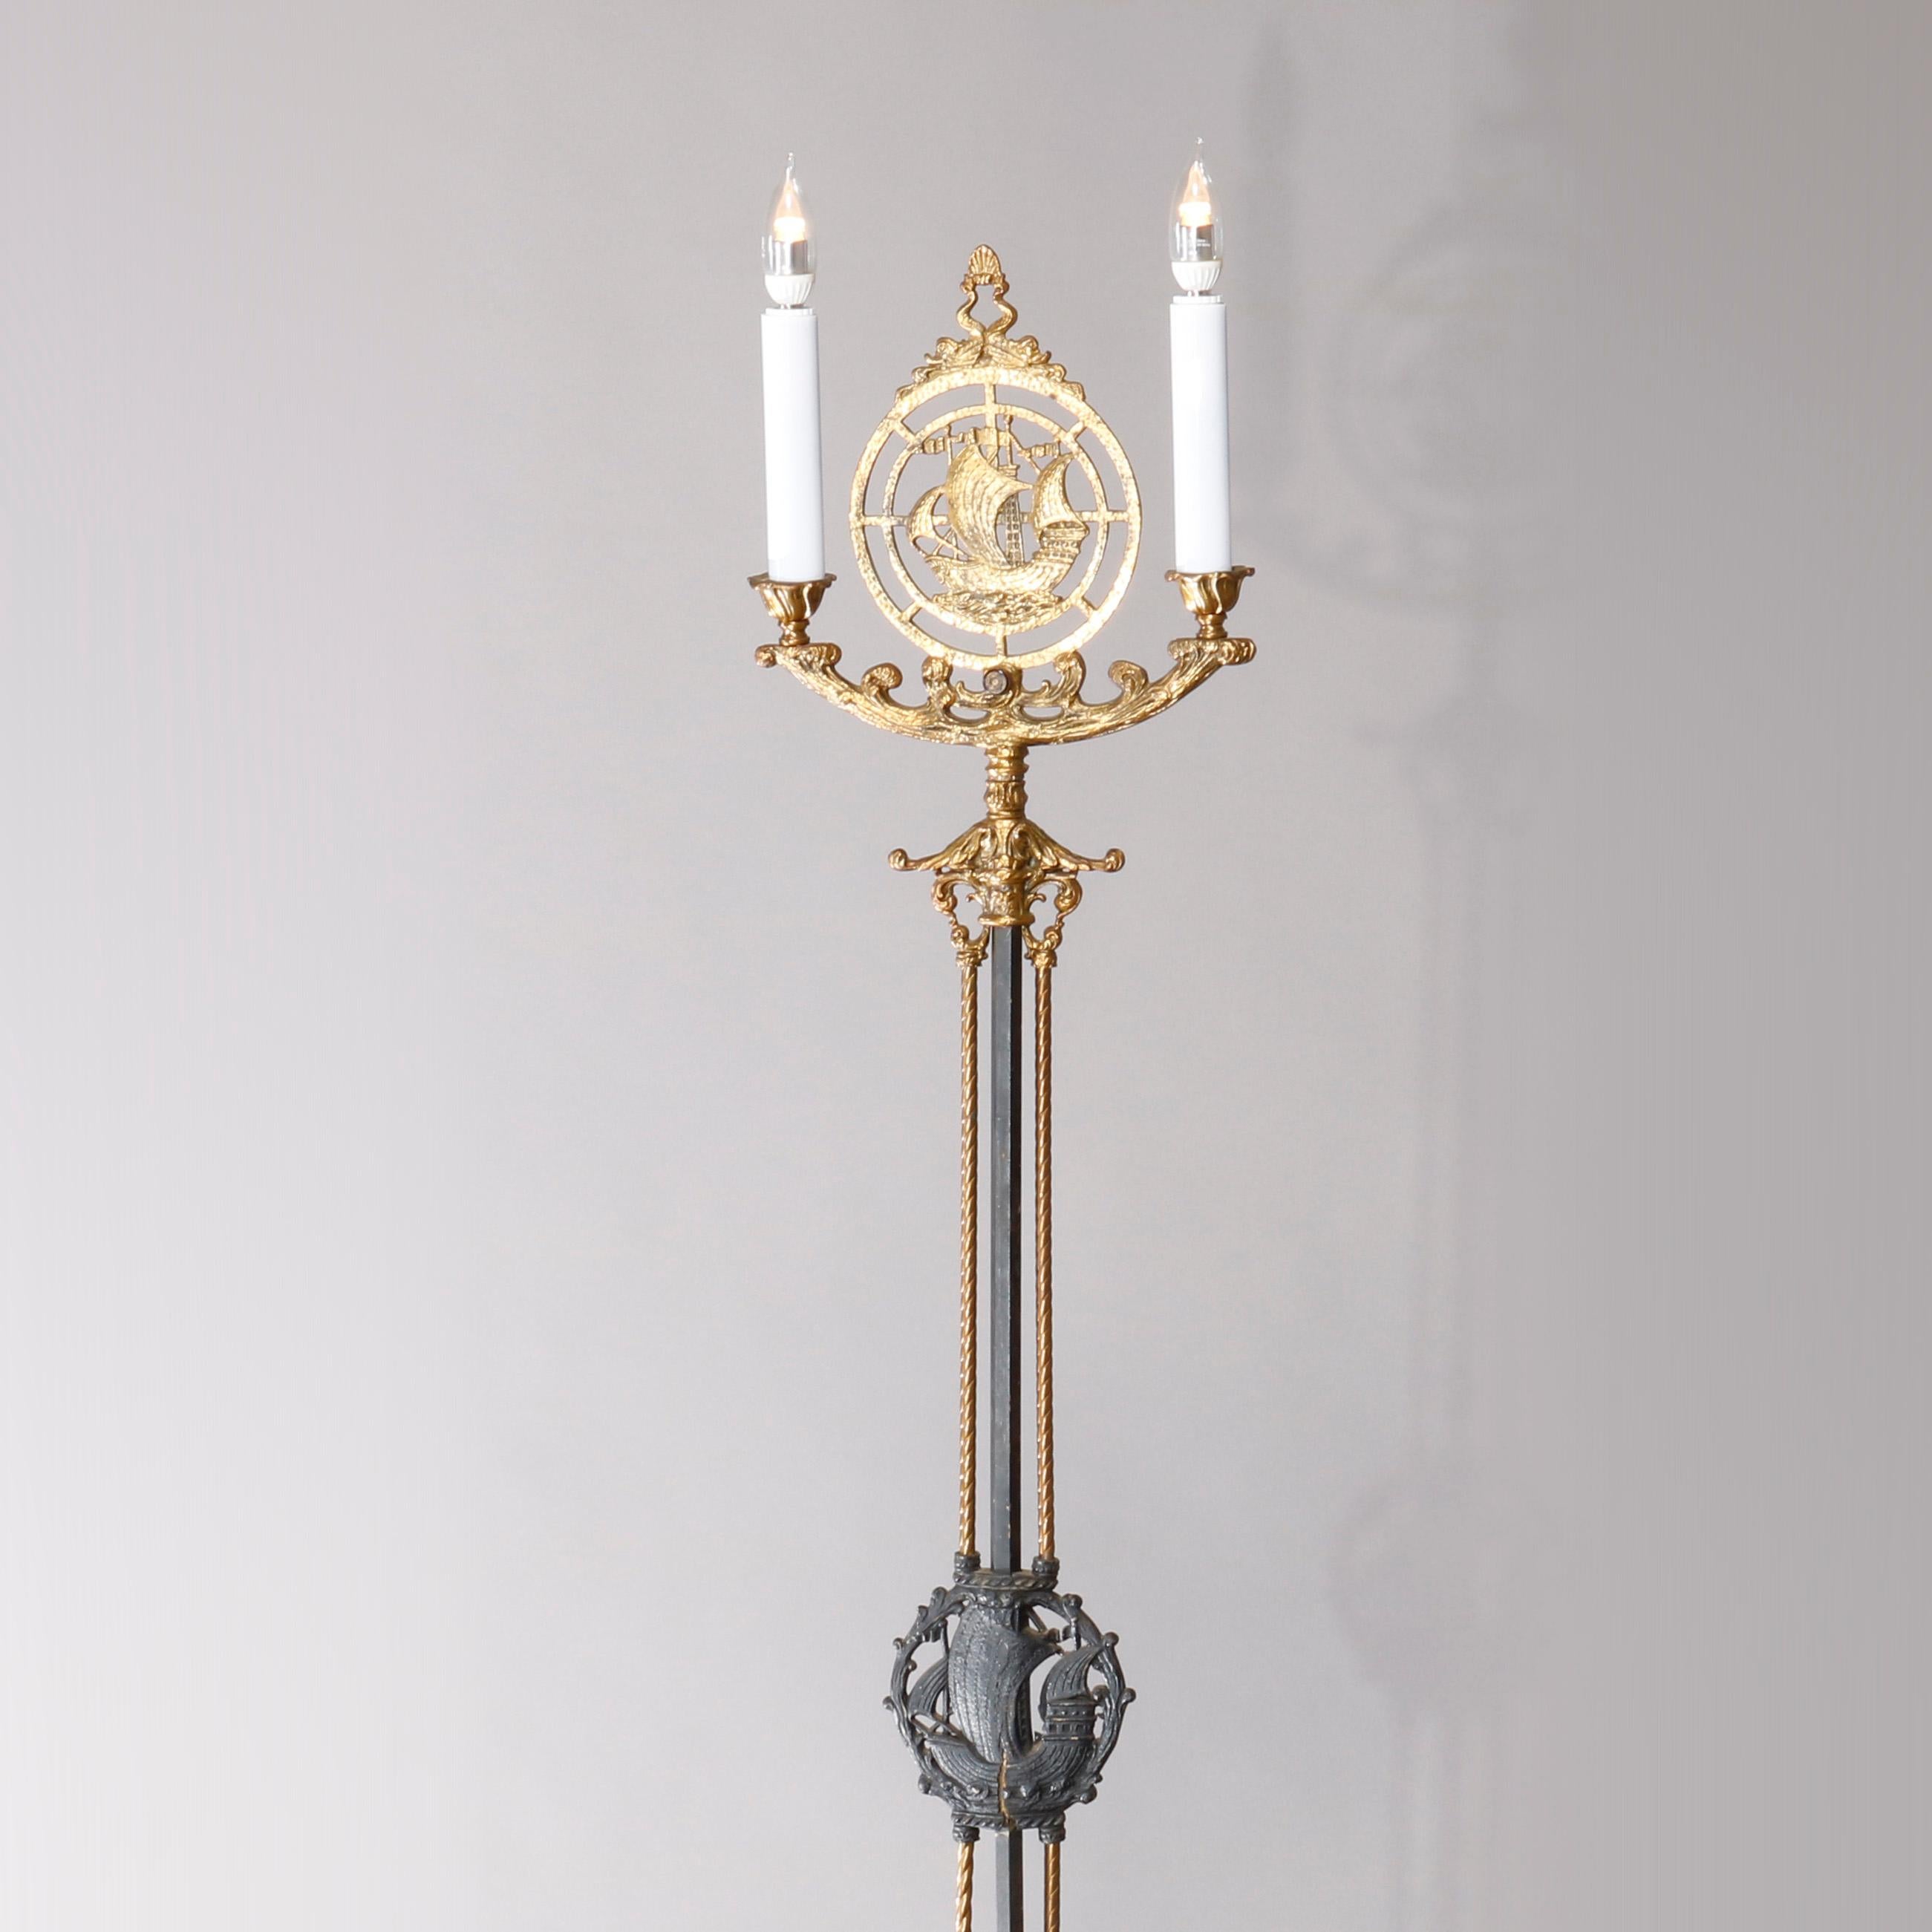 20th Century Rembrandt School Maritime Figural Ebonized and Gilt Wrought Iron Floor Lamp